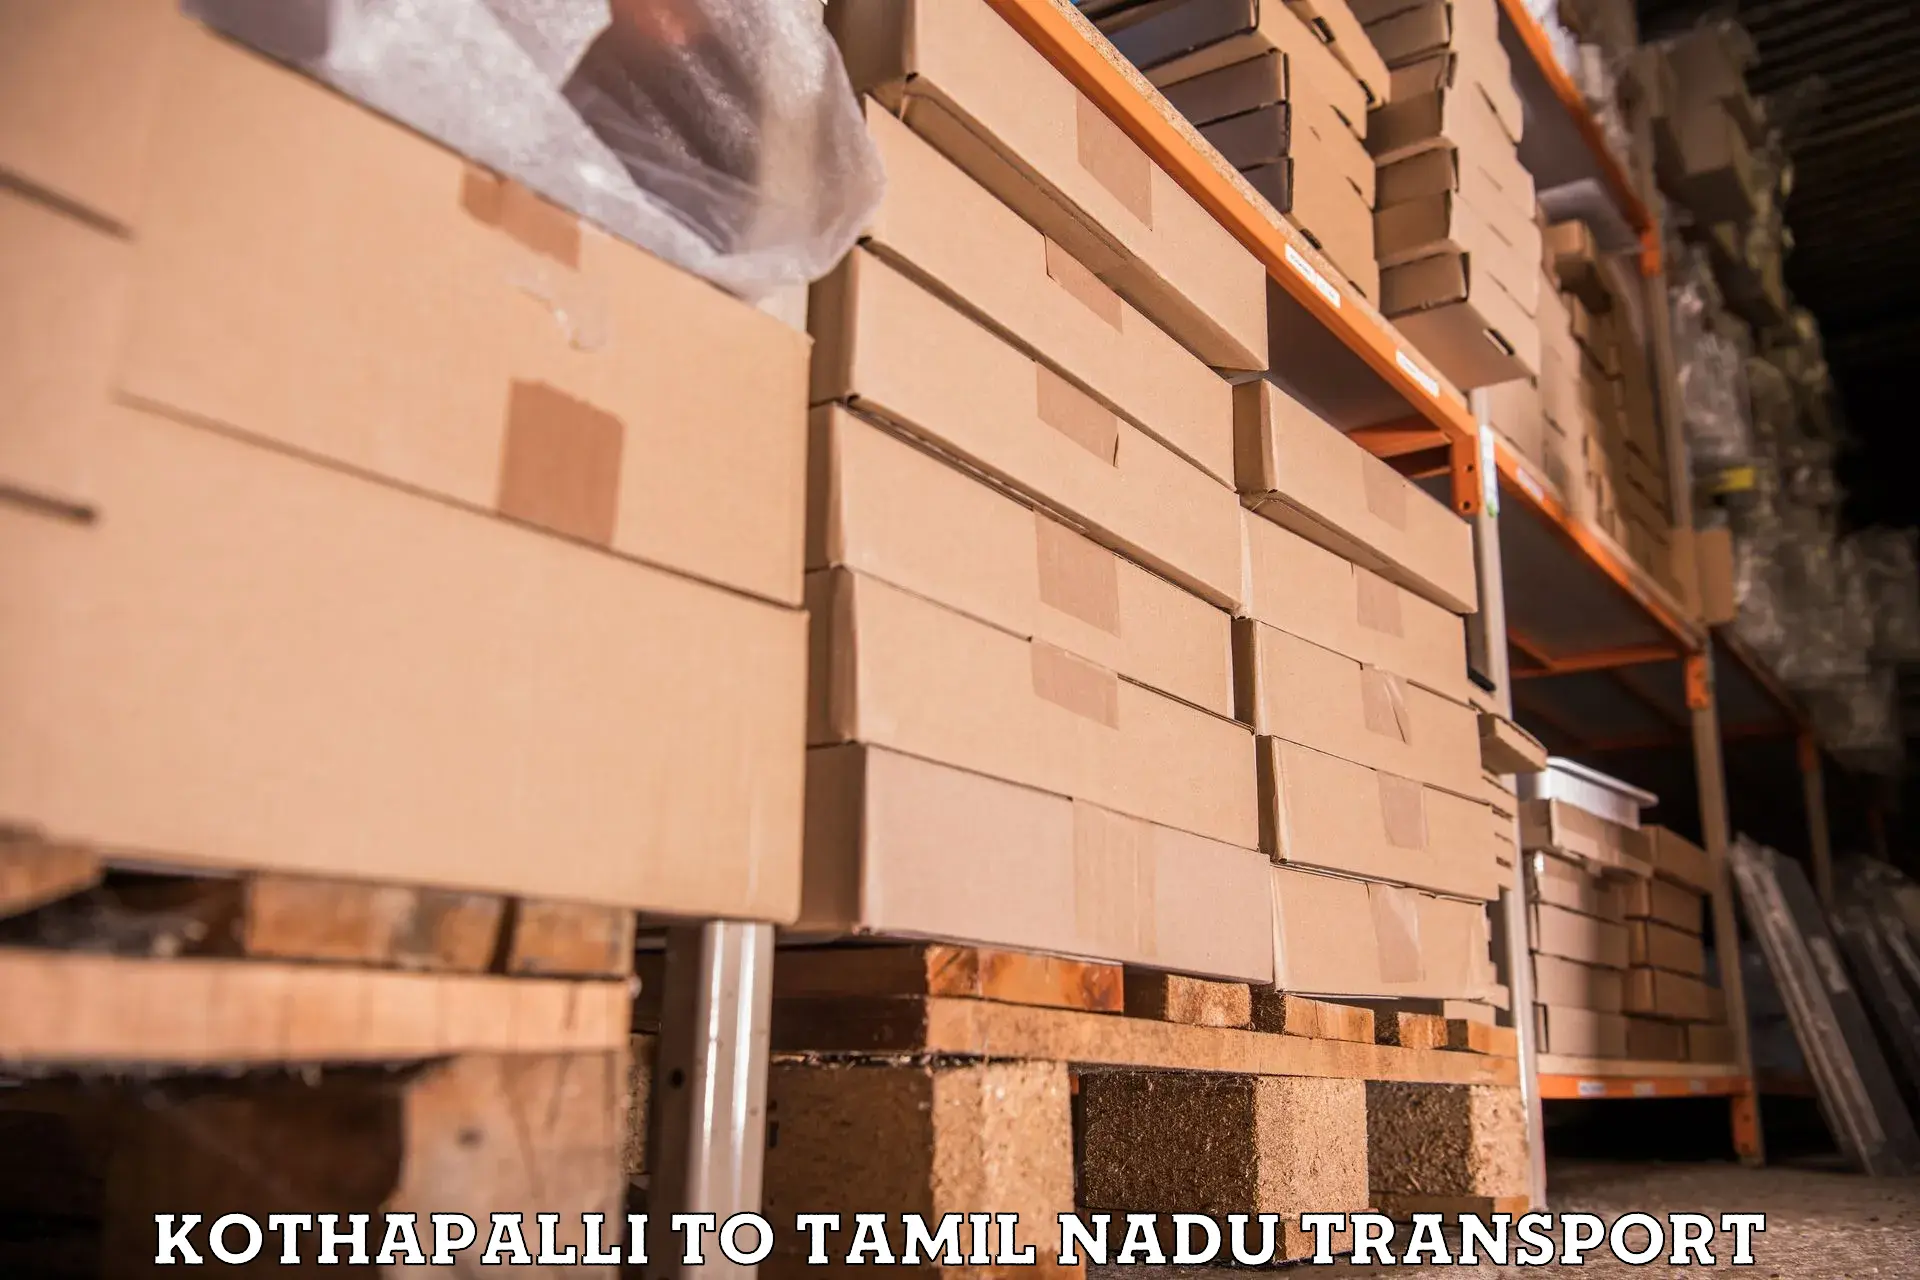 Truck transport companies in India Kothapalli to Hosur